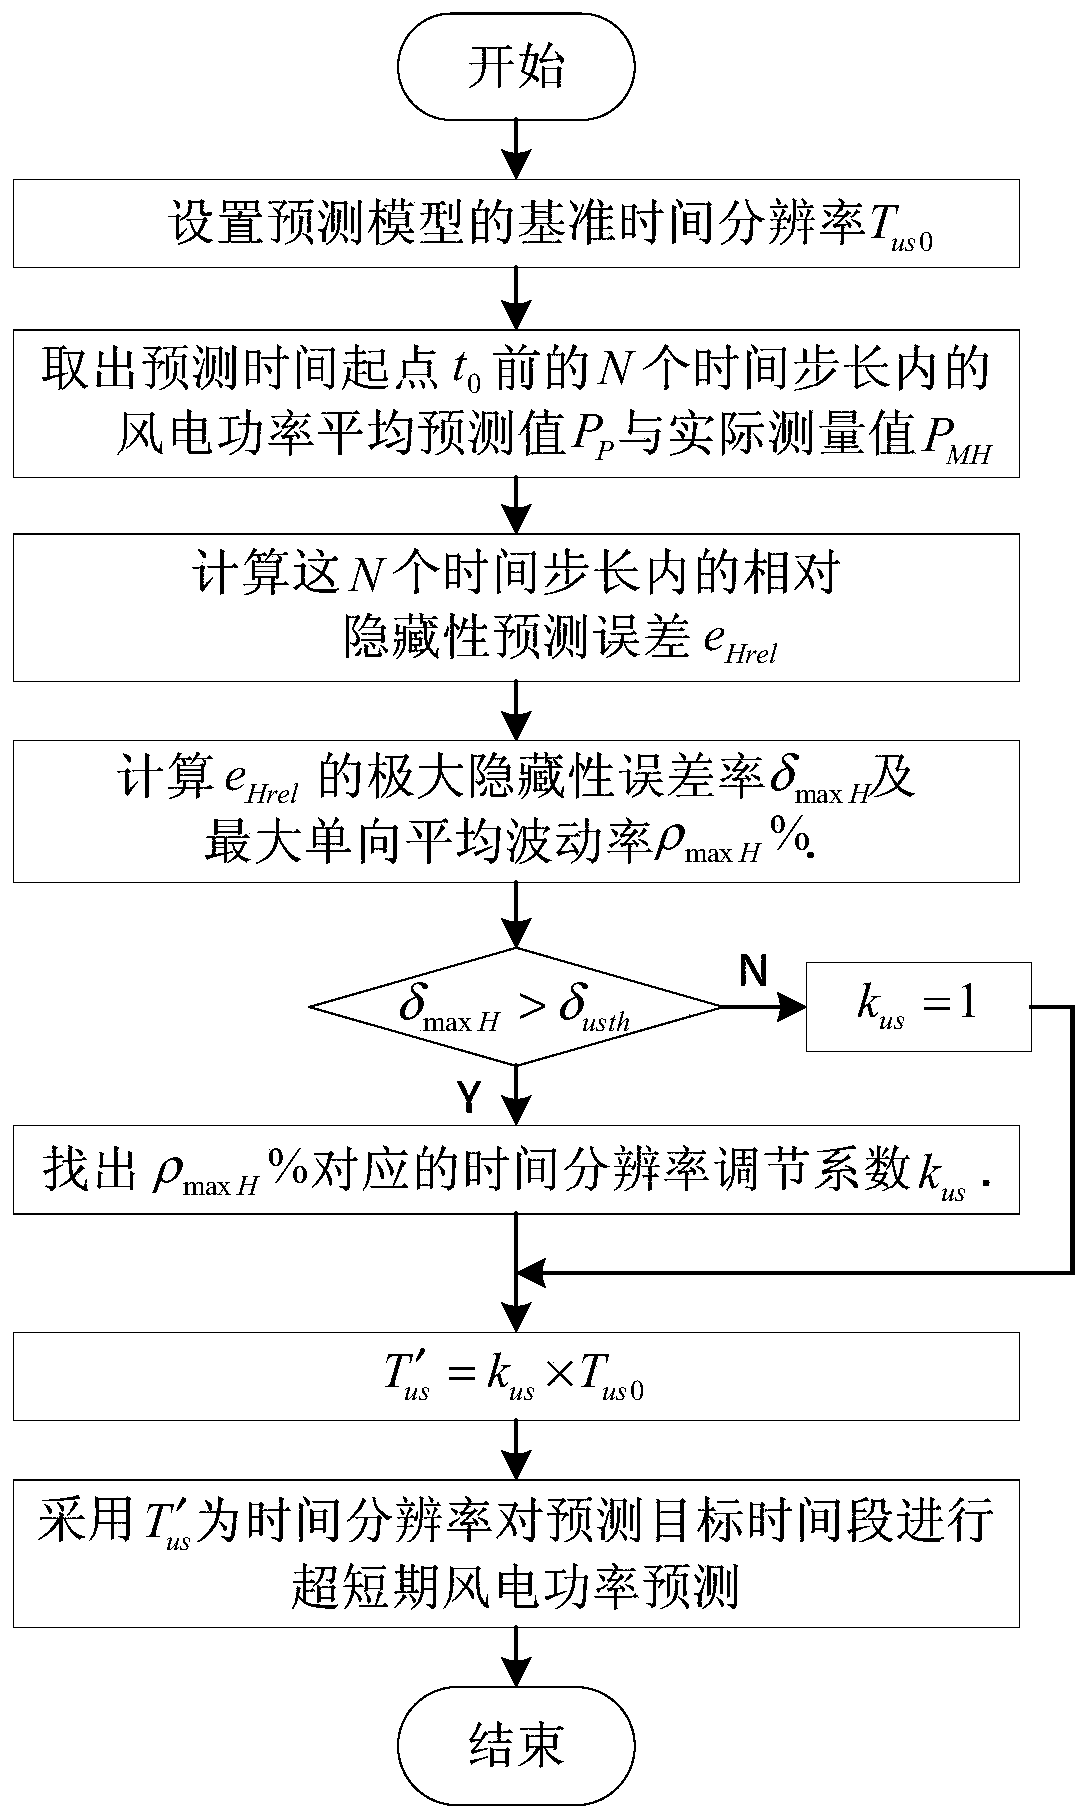 Ultra-short-term wind power prediction method with adaptive time resolution